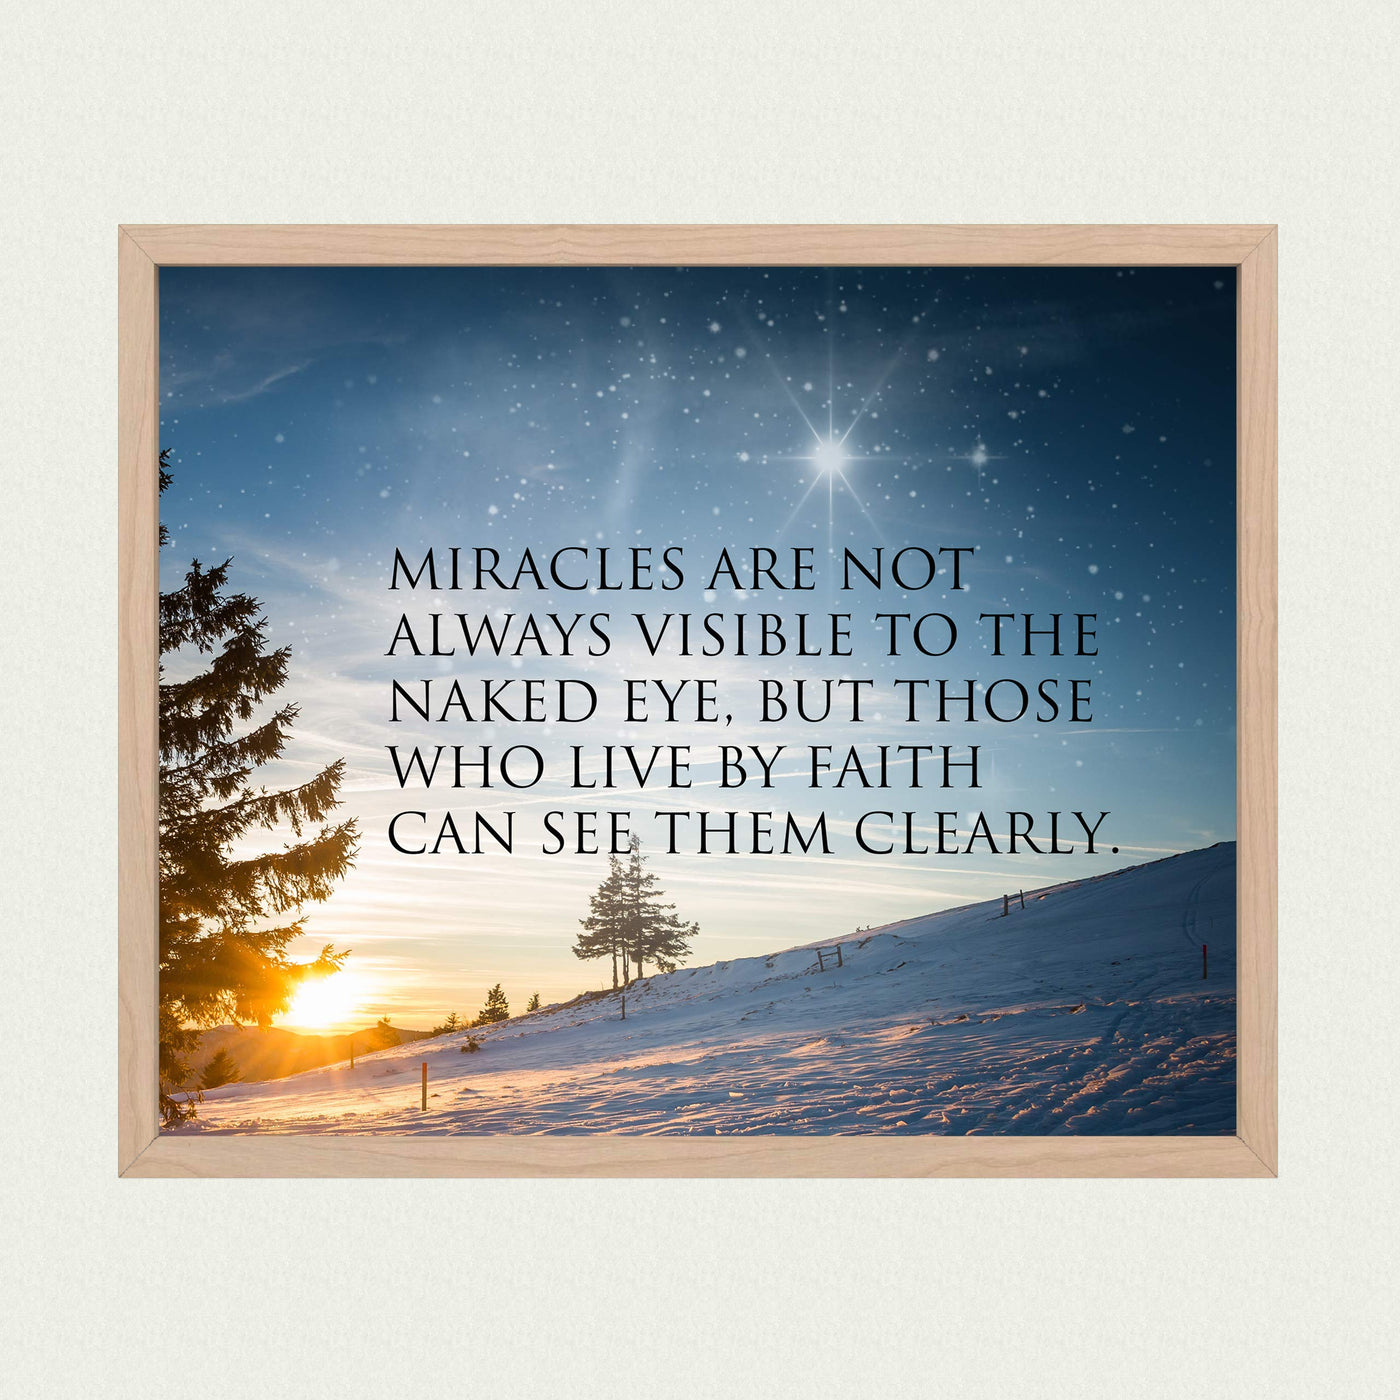 Miracles Not Always Visible to the Naked Eye Inspirational Wall Art Quotes -10 x 8" Starry Night Sunset Print-Ready to Frame. Modern Typographic Home-Office-School-Dorm Decor. Great Gift of Faith!